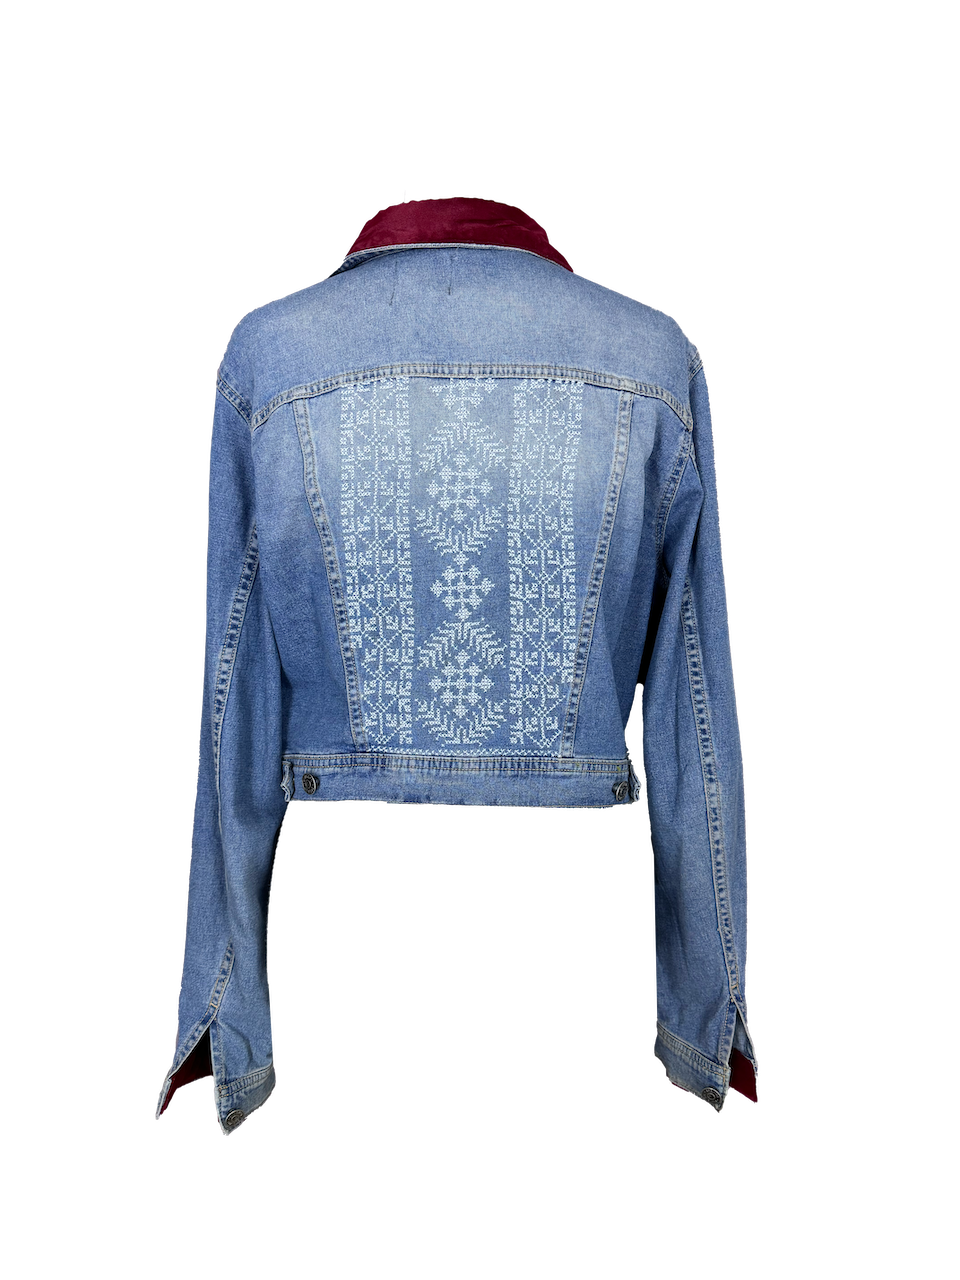 The Embroidered Denim Jacket in Light Blue With Red Velvet